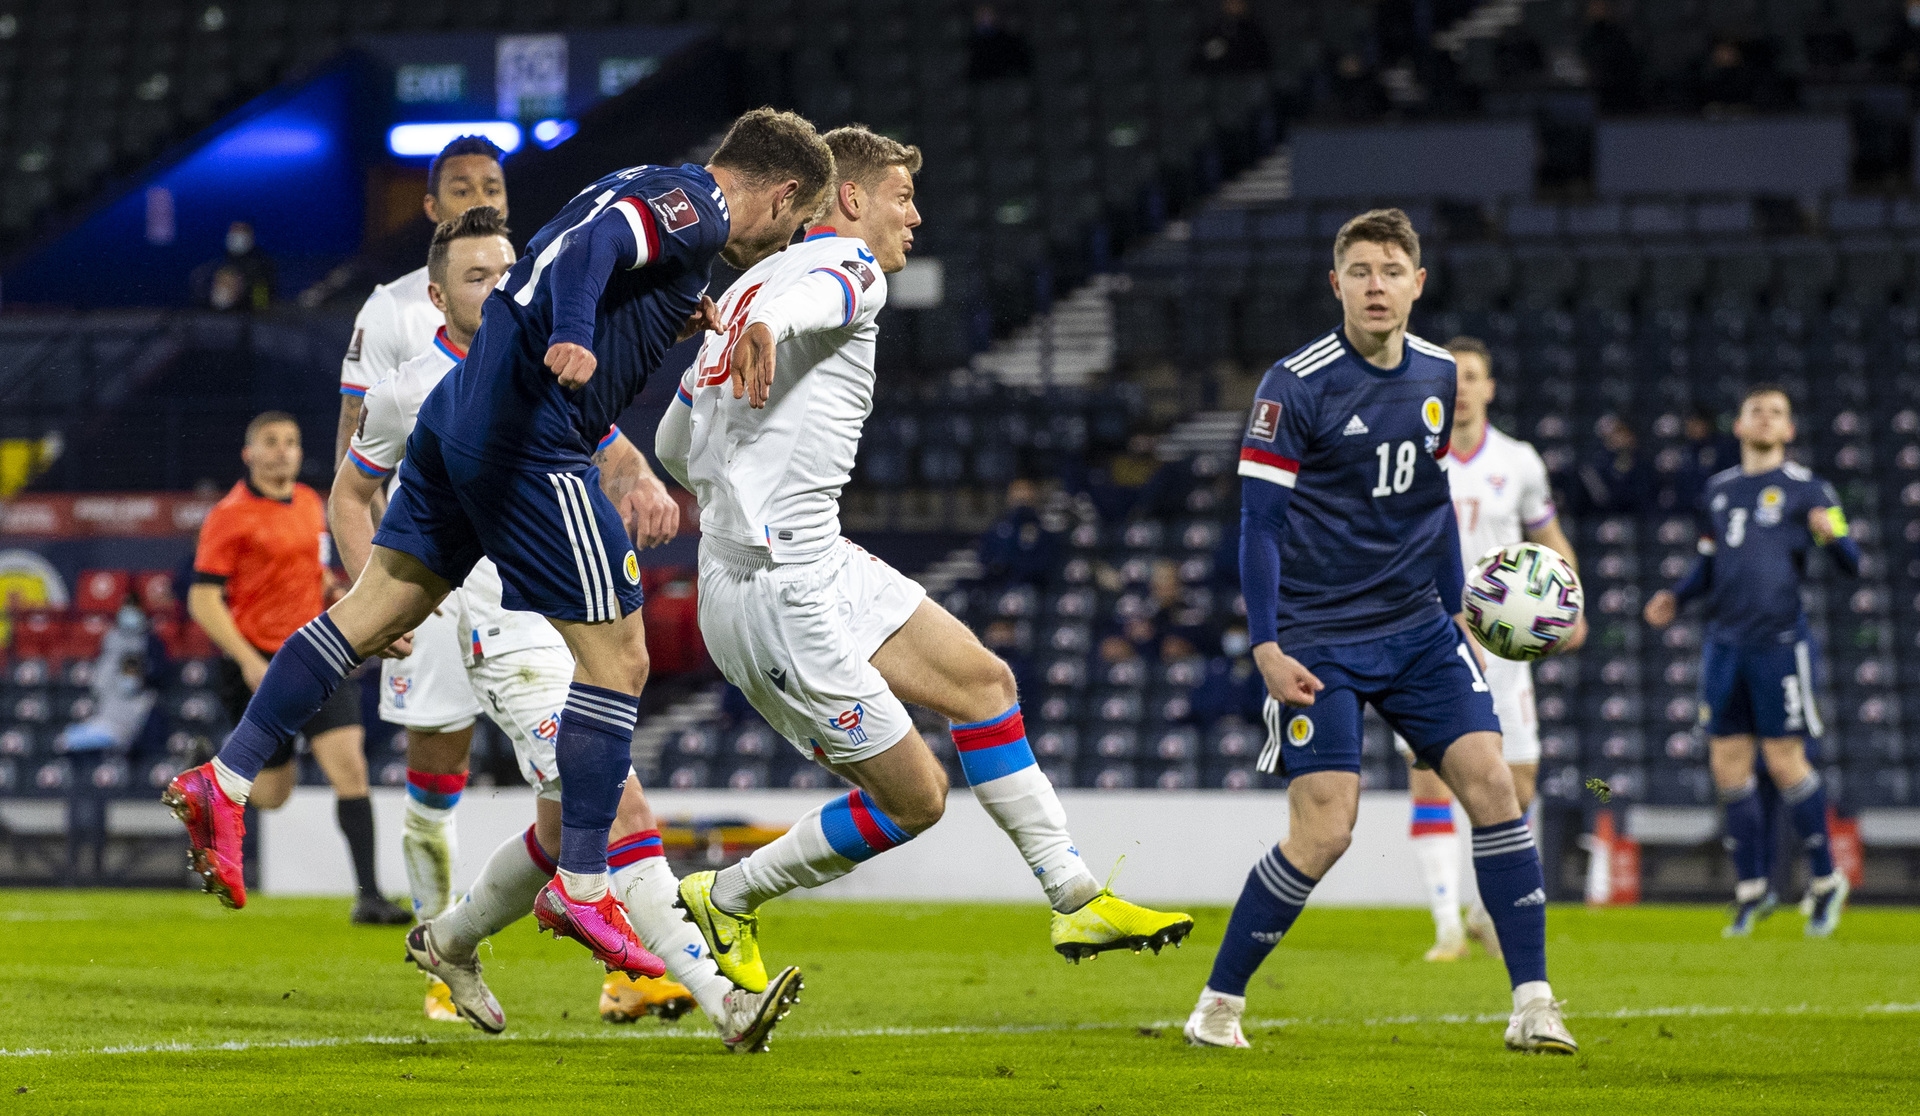 <strong>The result wasn’t in doubt by this stage, but Ryan Fraser made Scotland’s goal difference a bit healthier by heading home from a cross. </strong>”/><span
class=